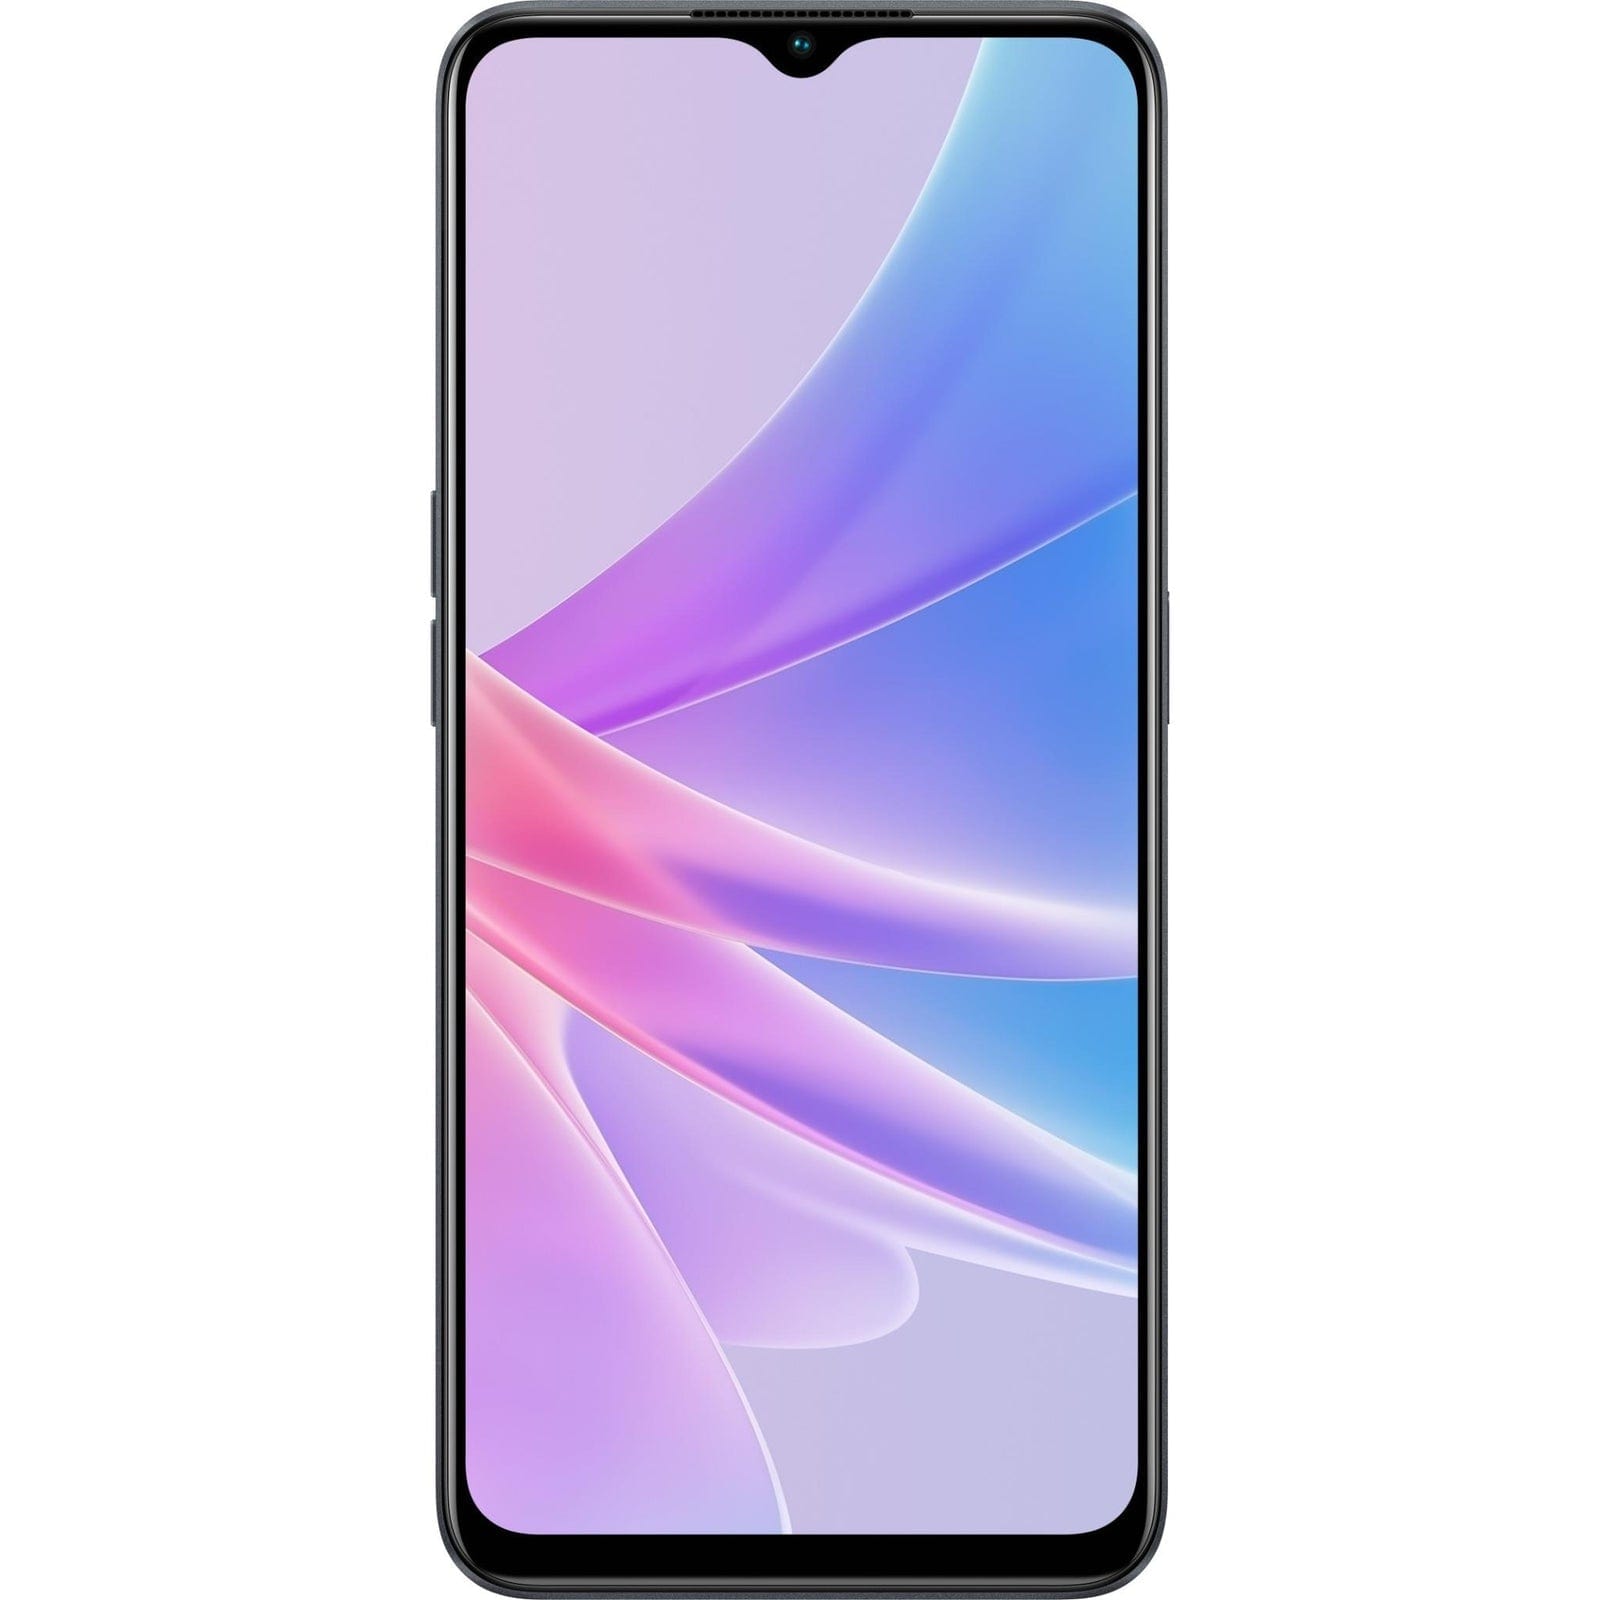 OPPO A78 5G 128GB (Glowing Blue)